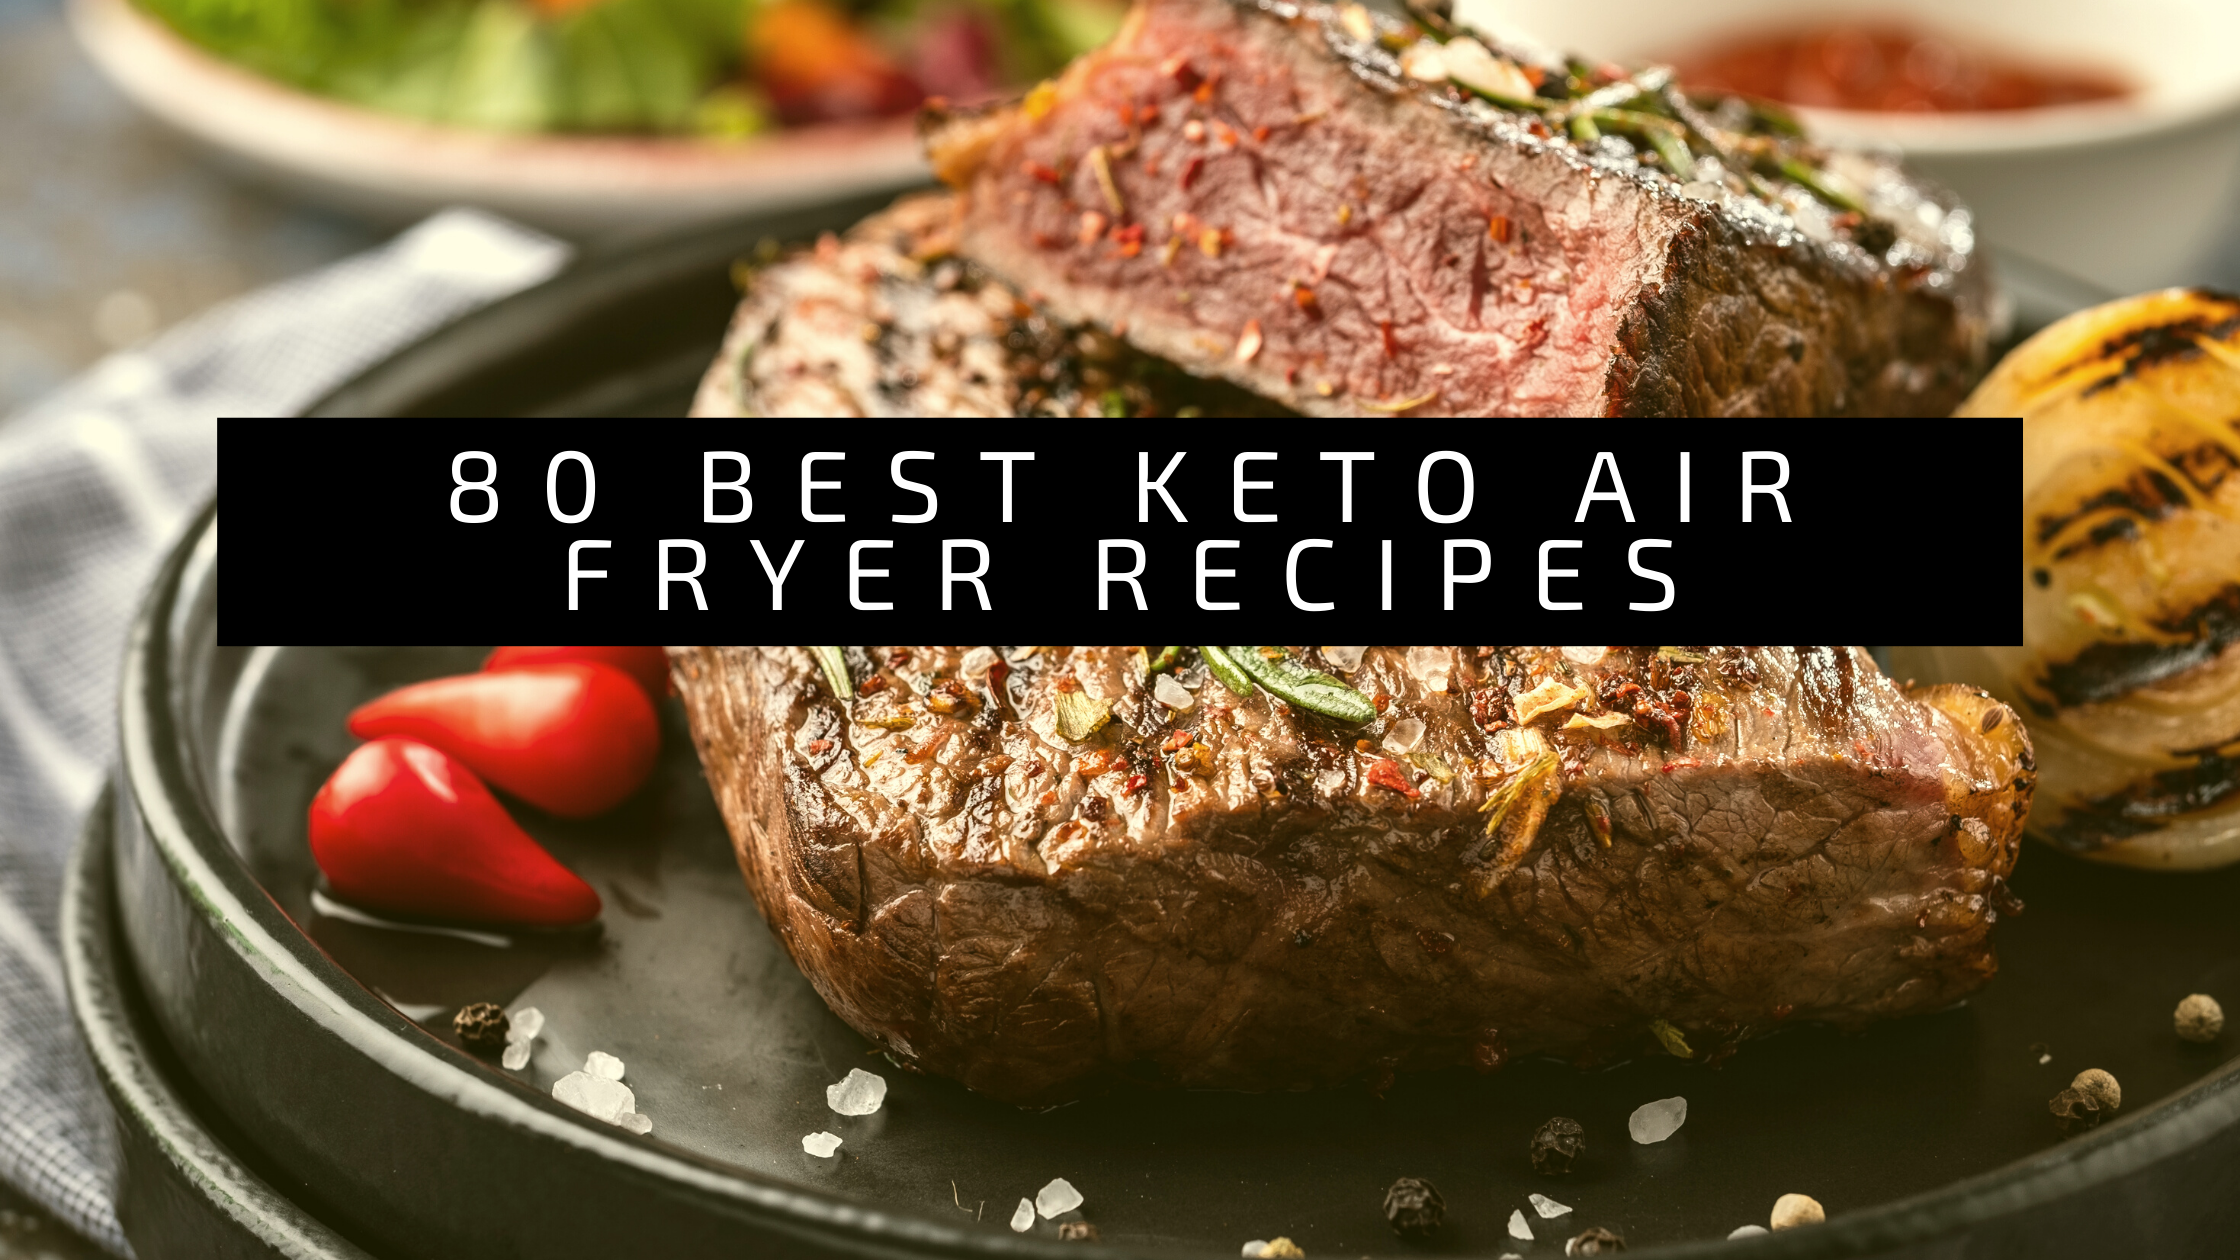 40 Family-Friendly Keto Air Fryer Recipes for Quick and Delicious Meals 3